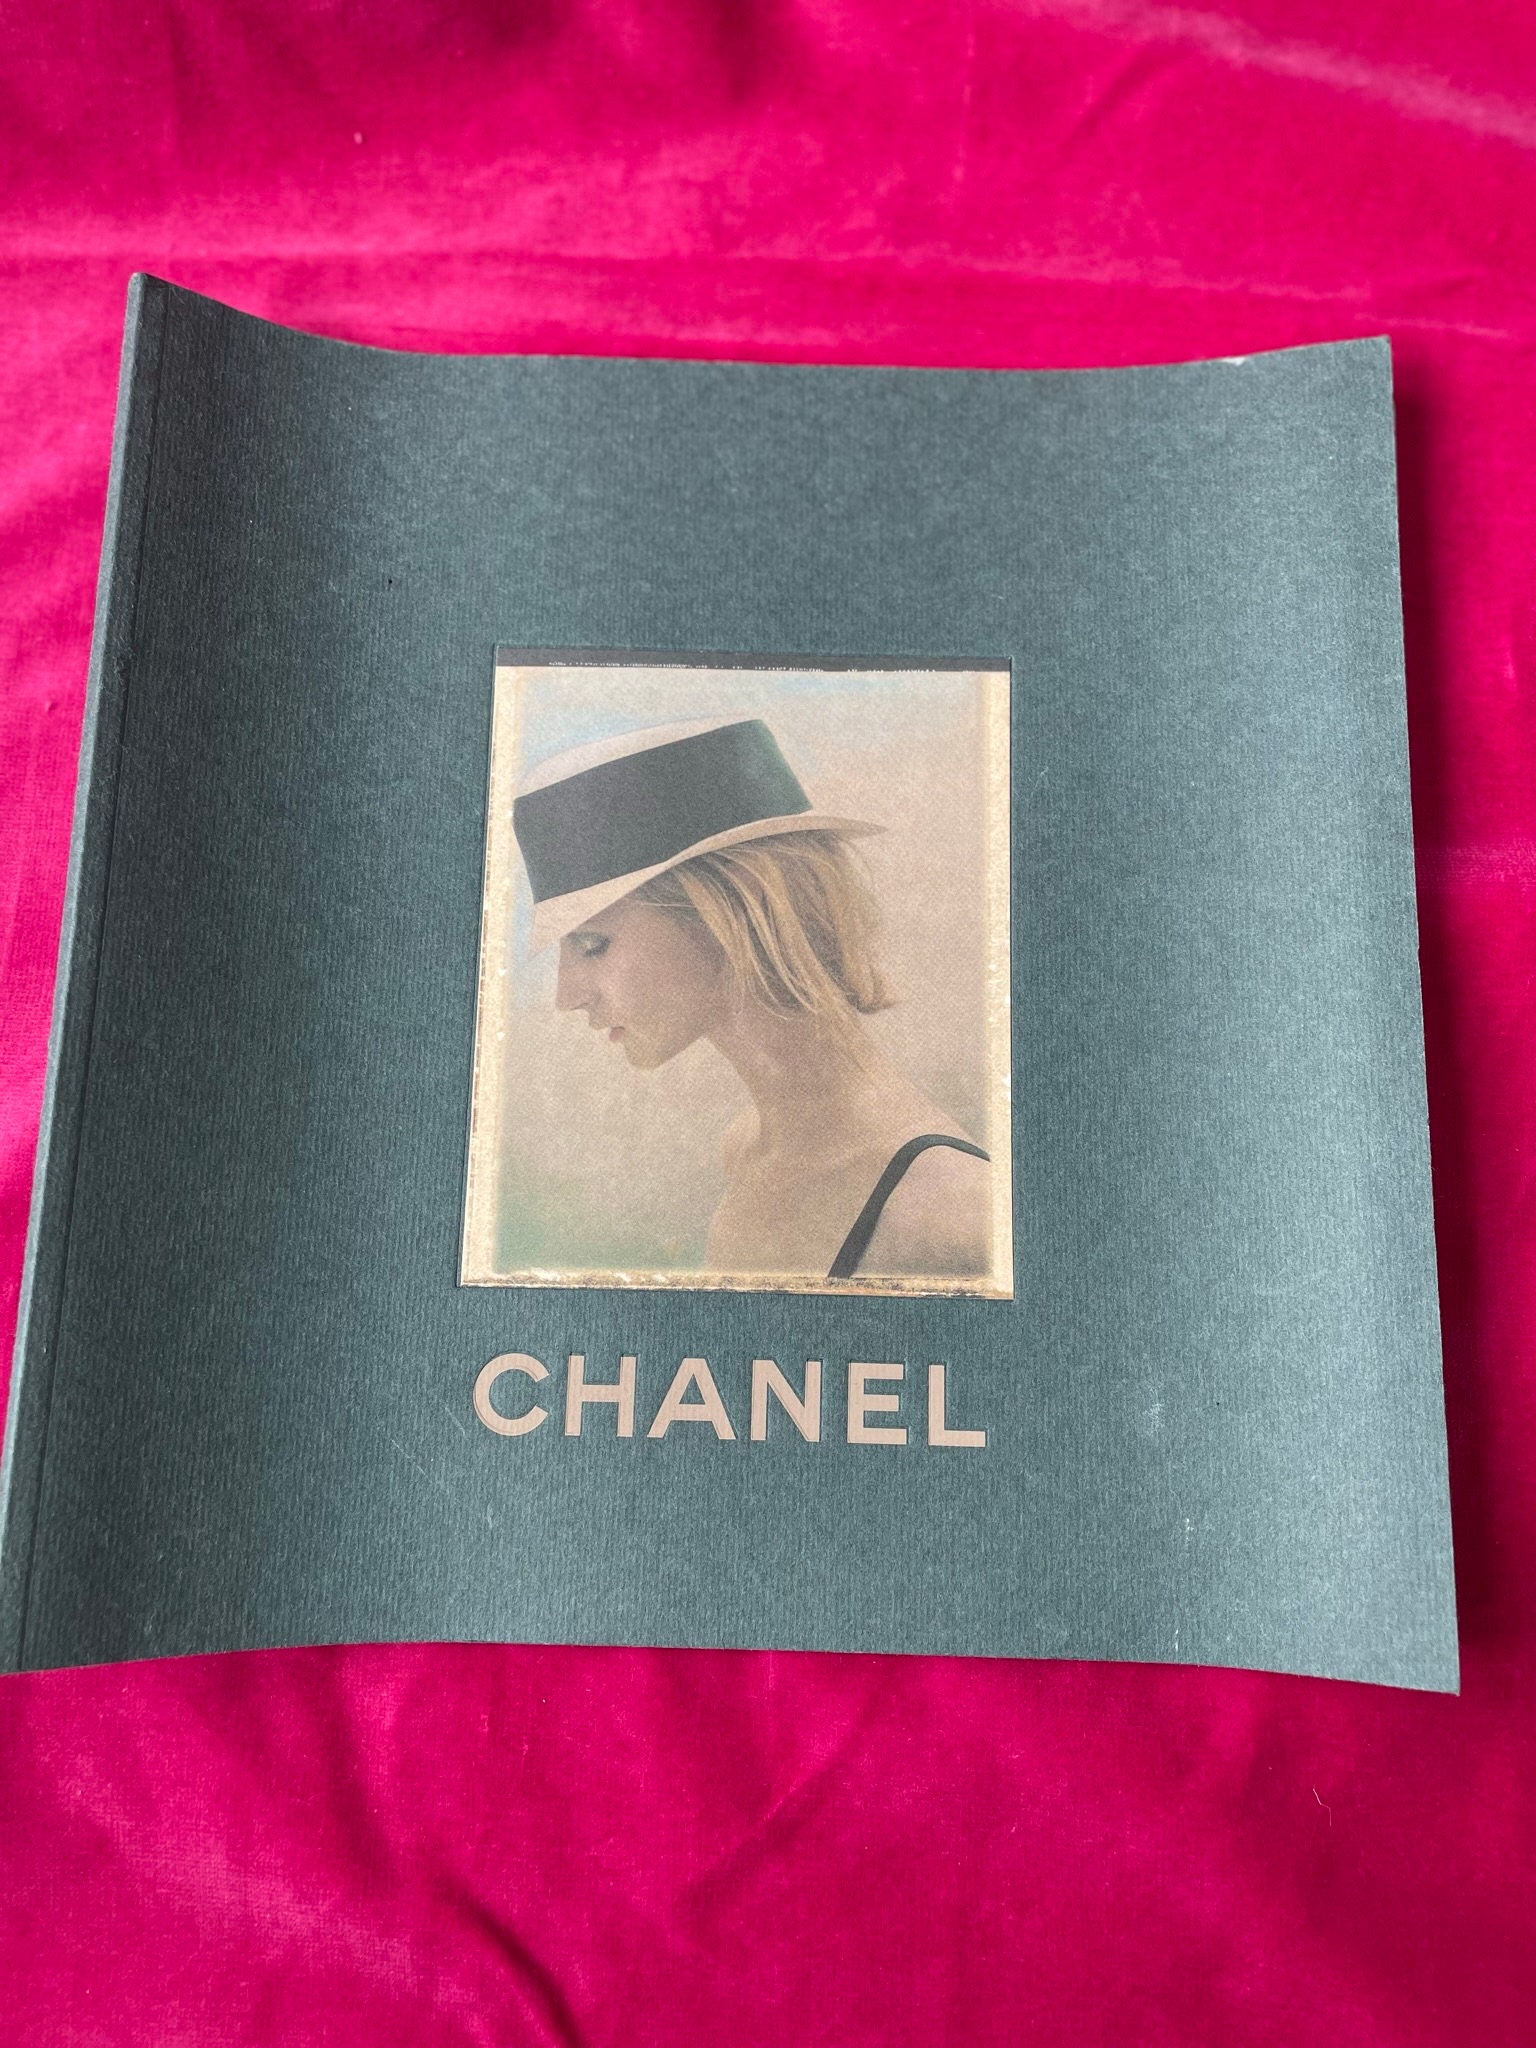 CHANEL Catalog Book FALL - WINTER 1996 - 1997 COLLECTION From Japan